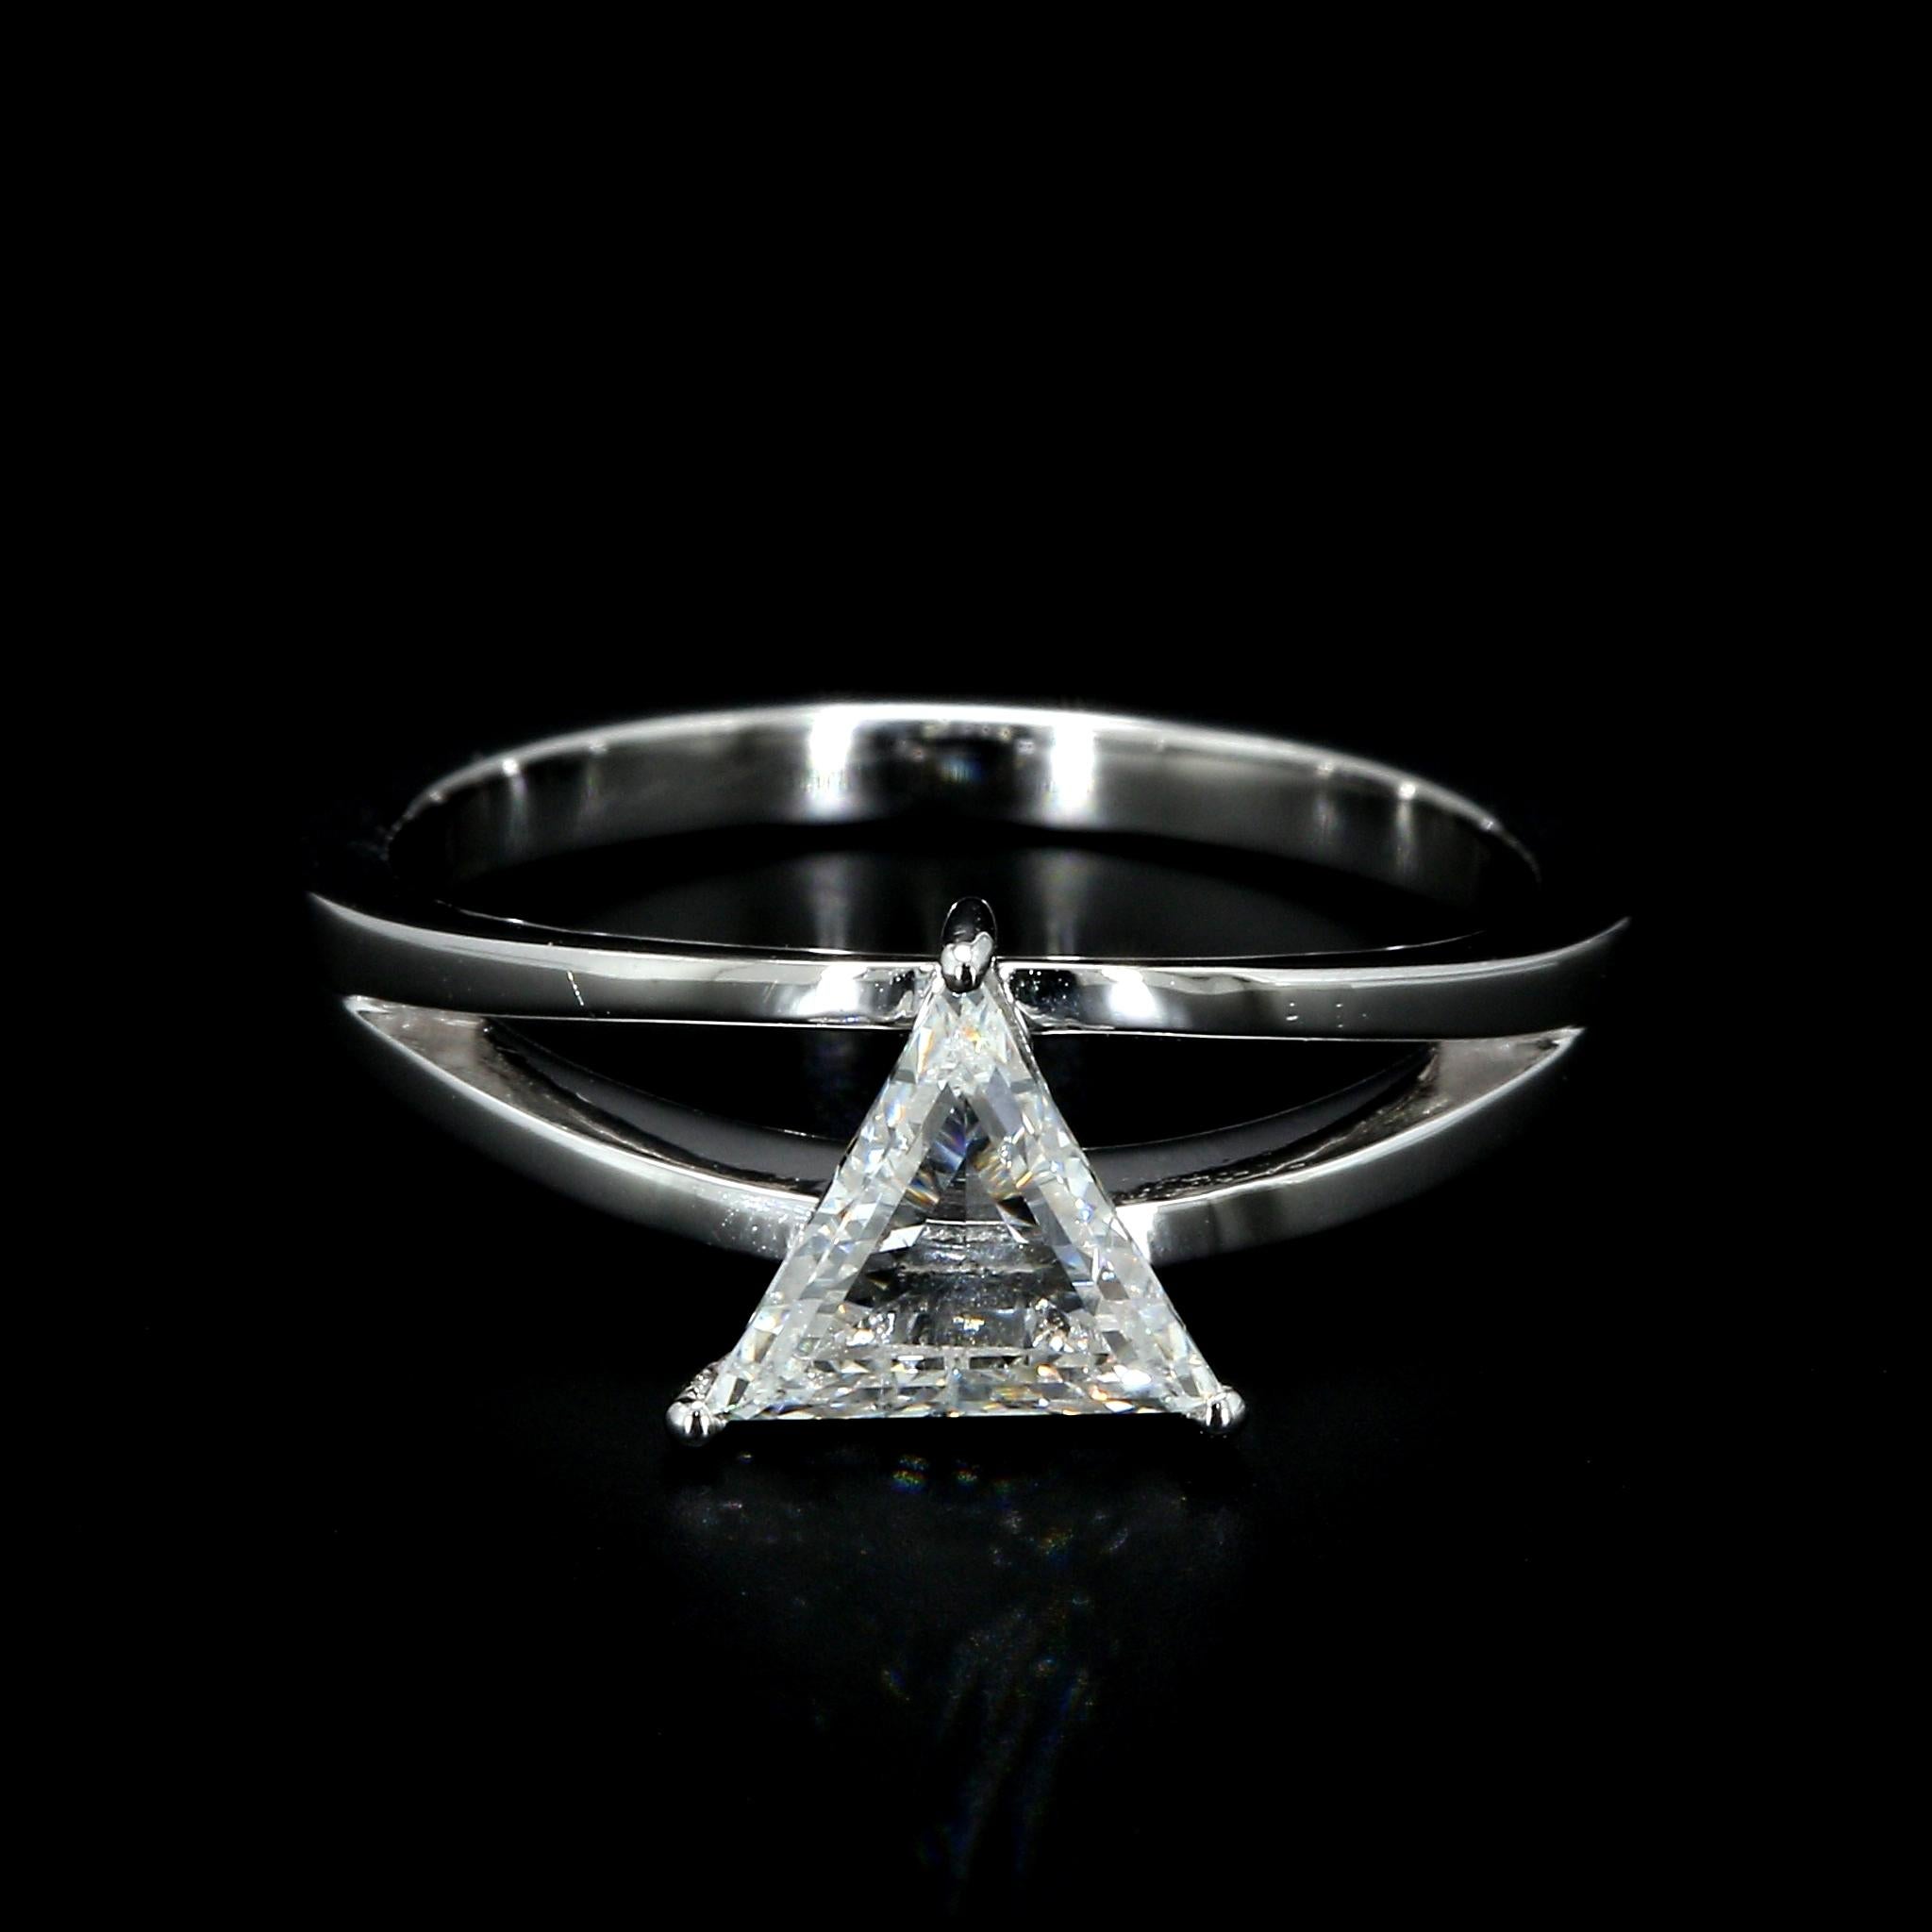 deathly hallows engagement ring